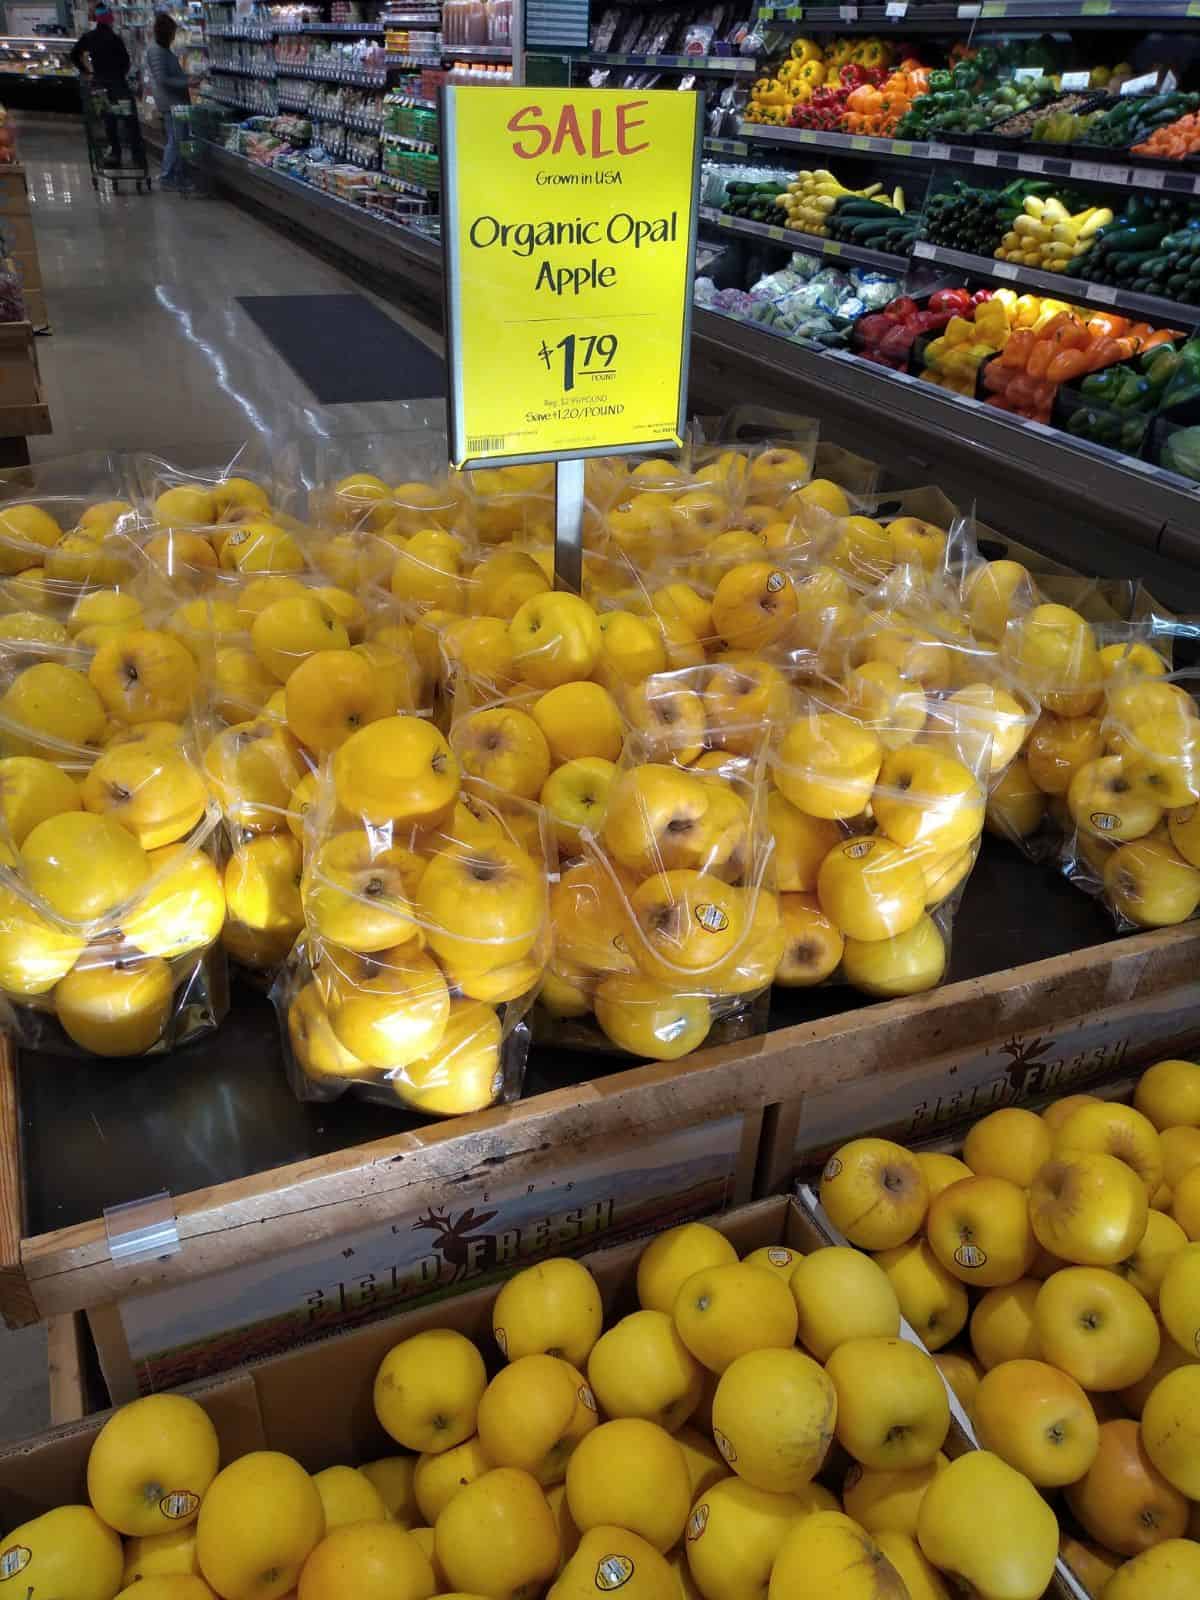 A display of Organic Opal apples on sale for $1.79/lb. The apples are in plastic bags.